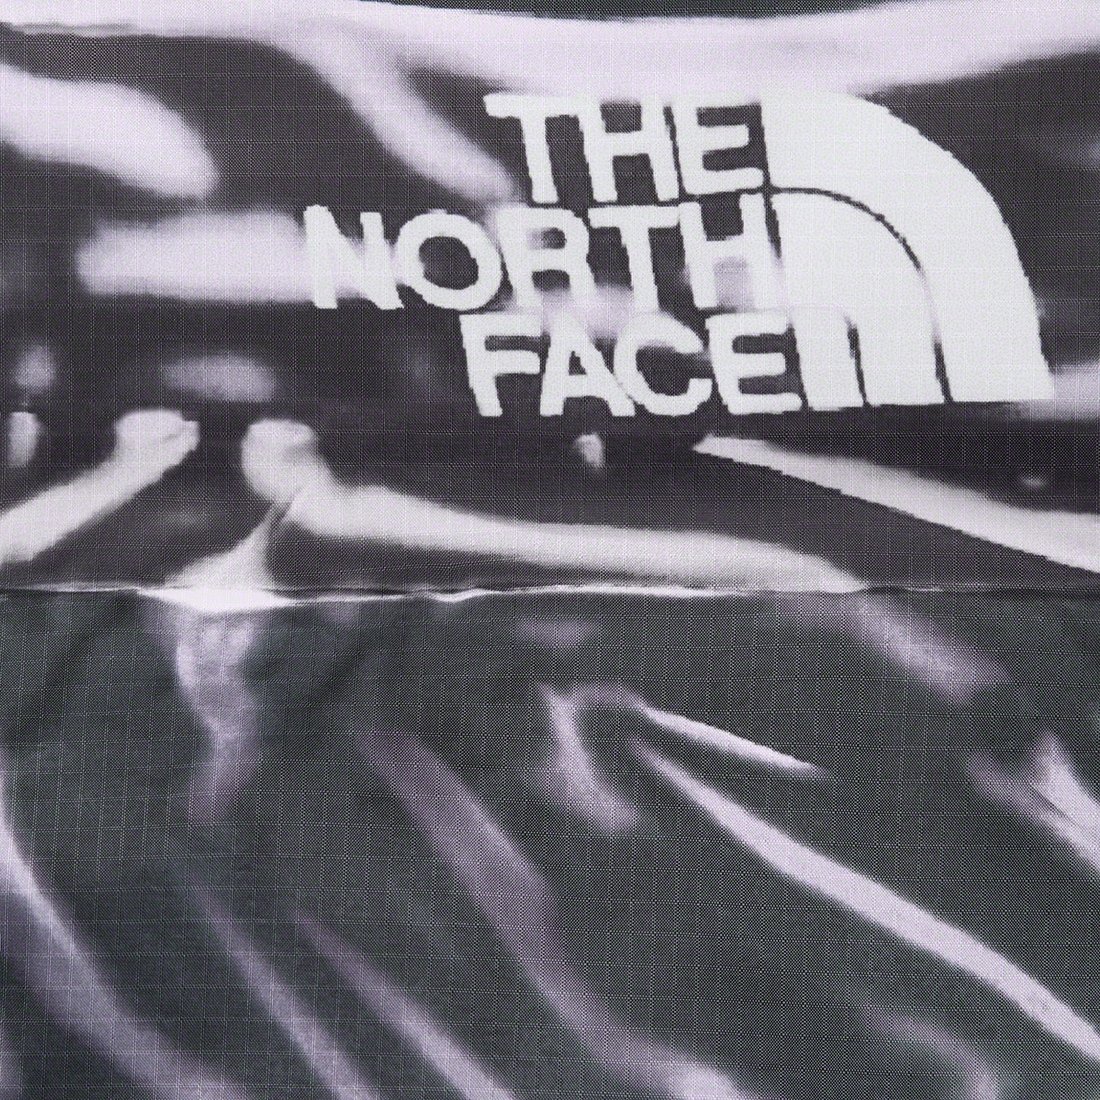 Details on Supreme The North Face Trompe L’oeil Printed Nuptse Jacket Black from spring summer 2023 (Price is $398)